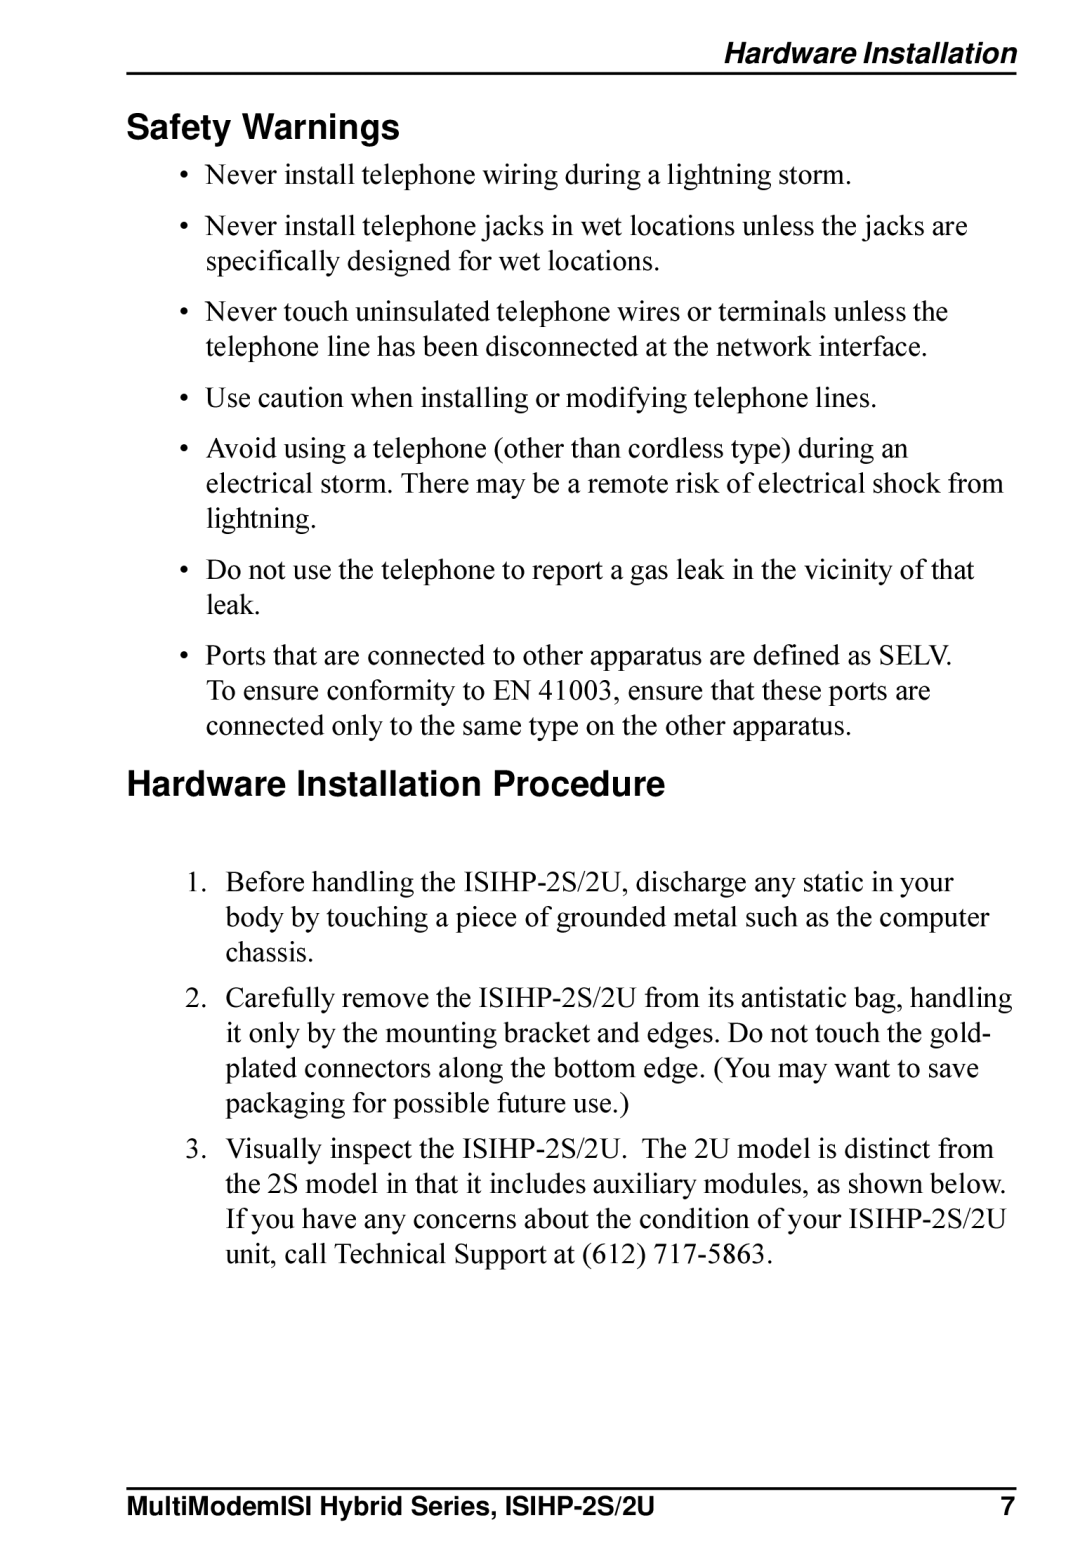 Multi-Tech Systems ISIHP-2U, ISIHP-2S quick start Safety Warnings, Hardware Installation Procedure 